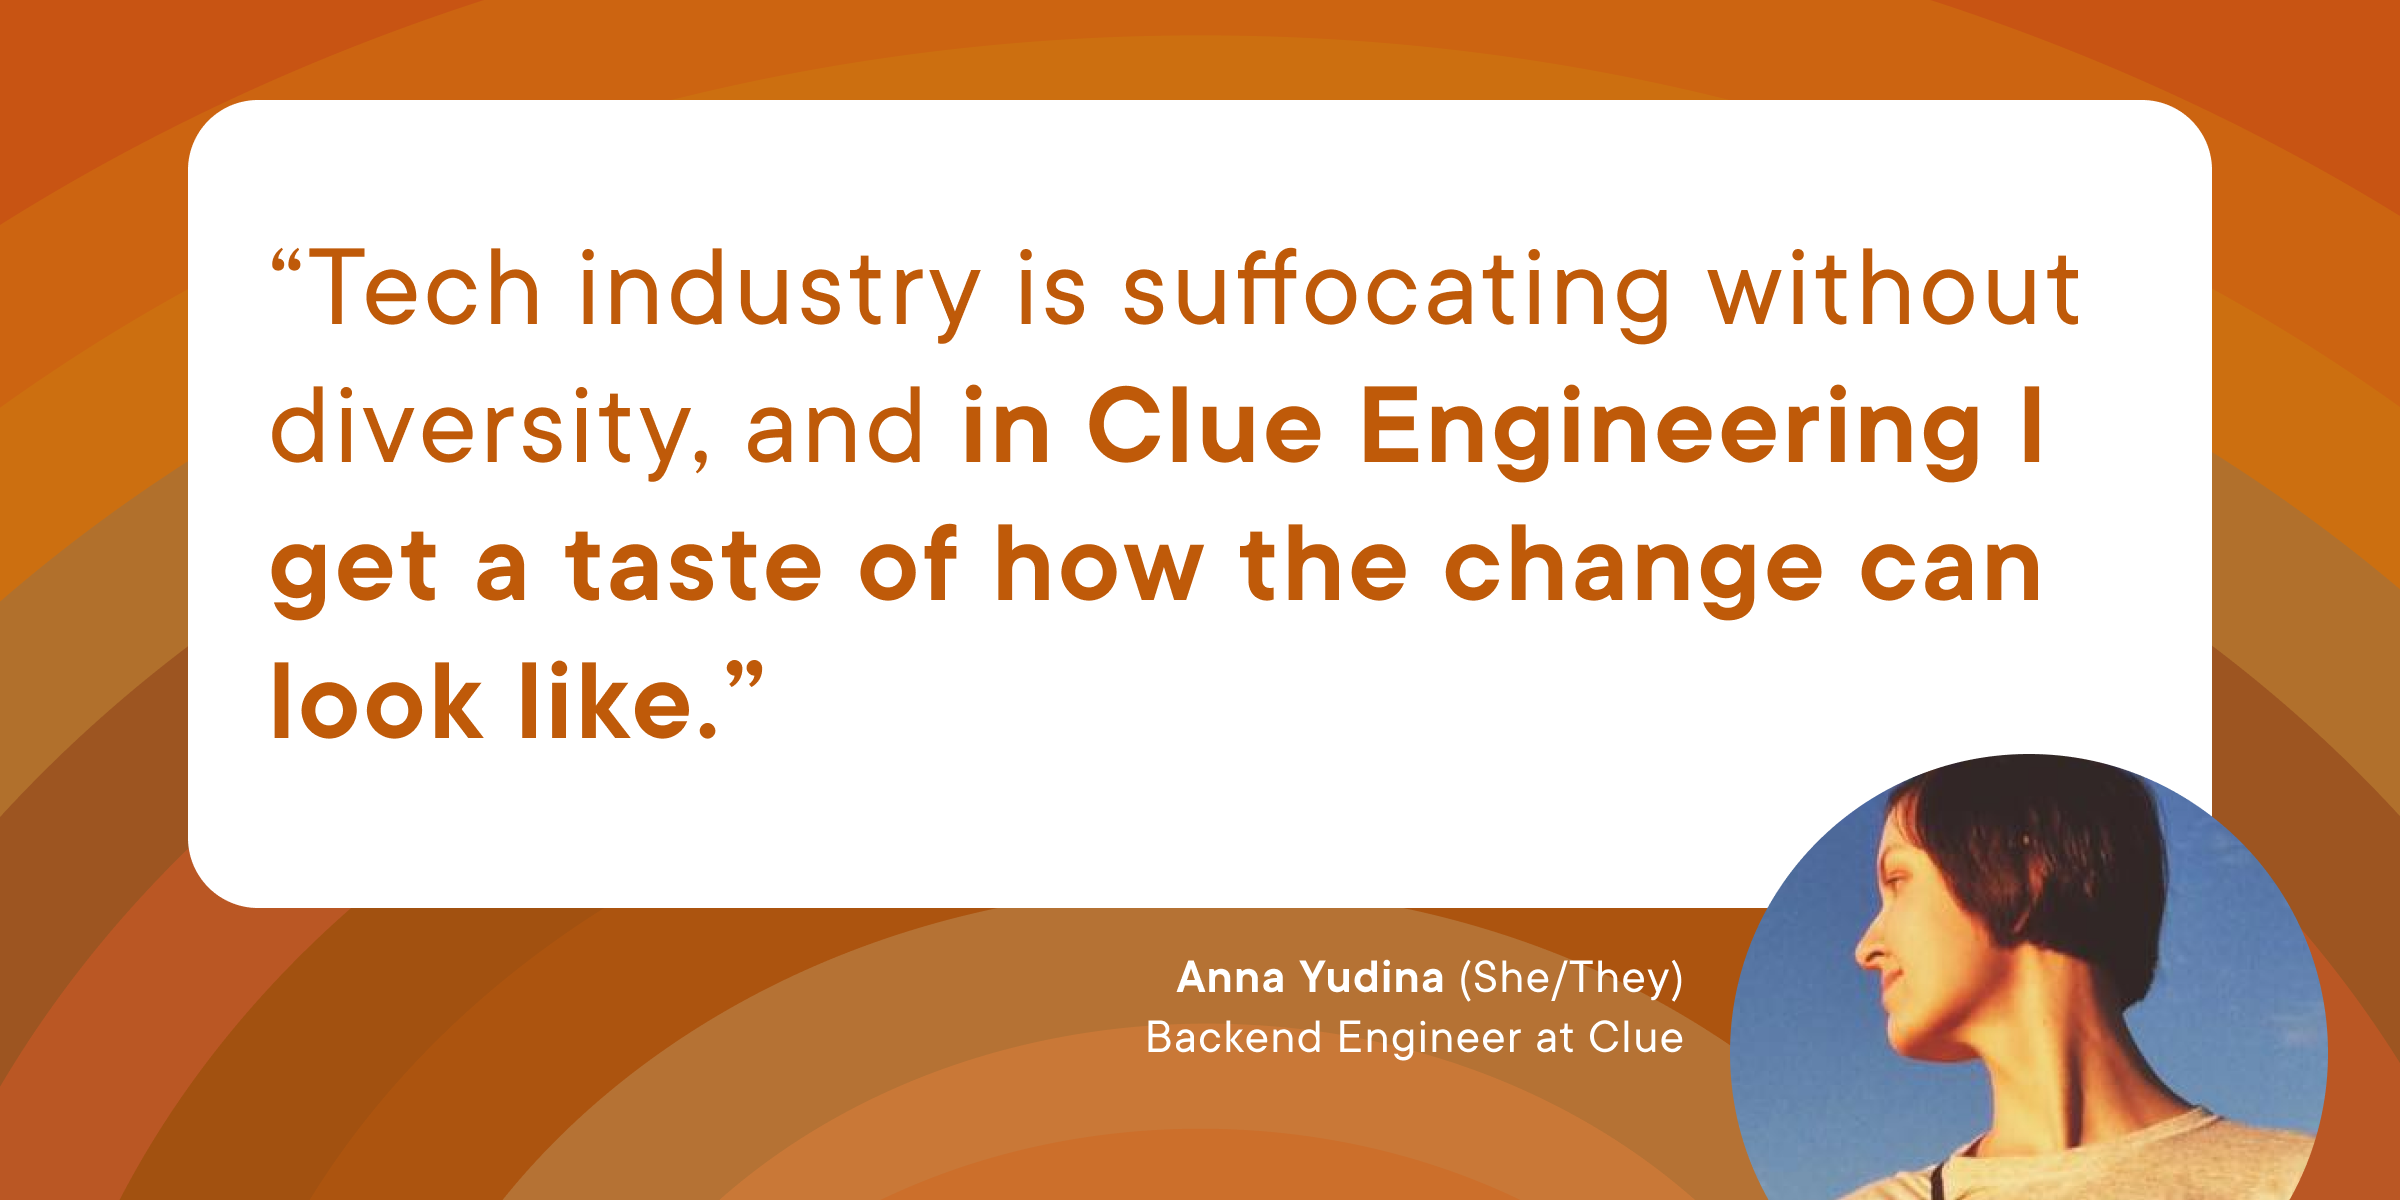 A quote from Clue employee Anna. The quote says 'Tech industry is suffocating without diversity, and in Clue Engineering I get a taste of how the change can look like.' 